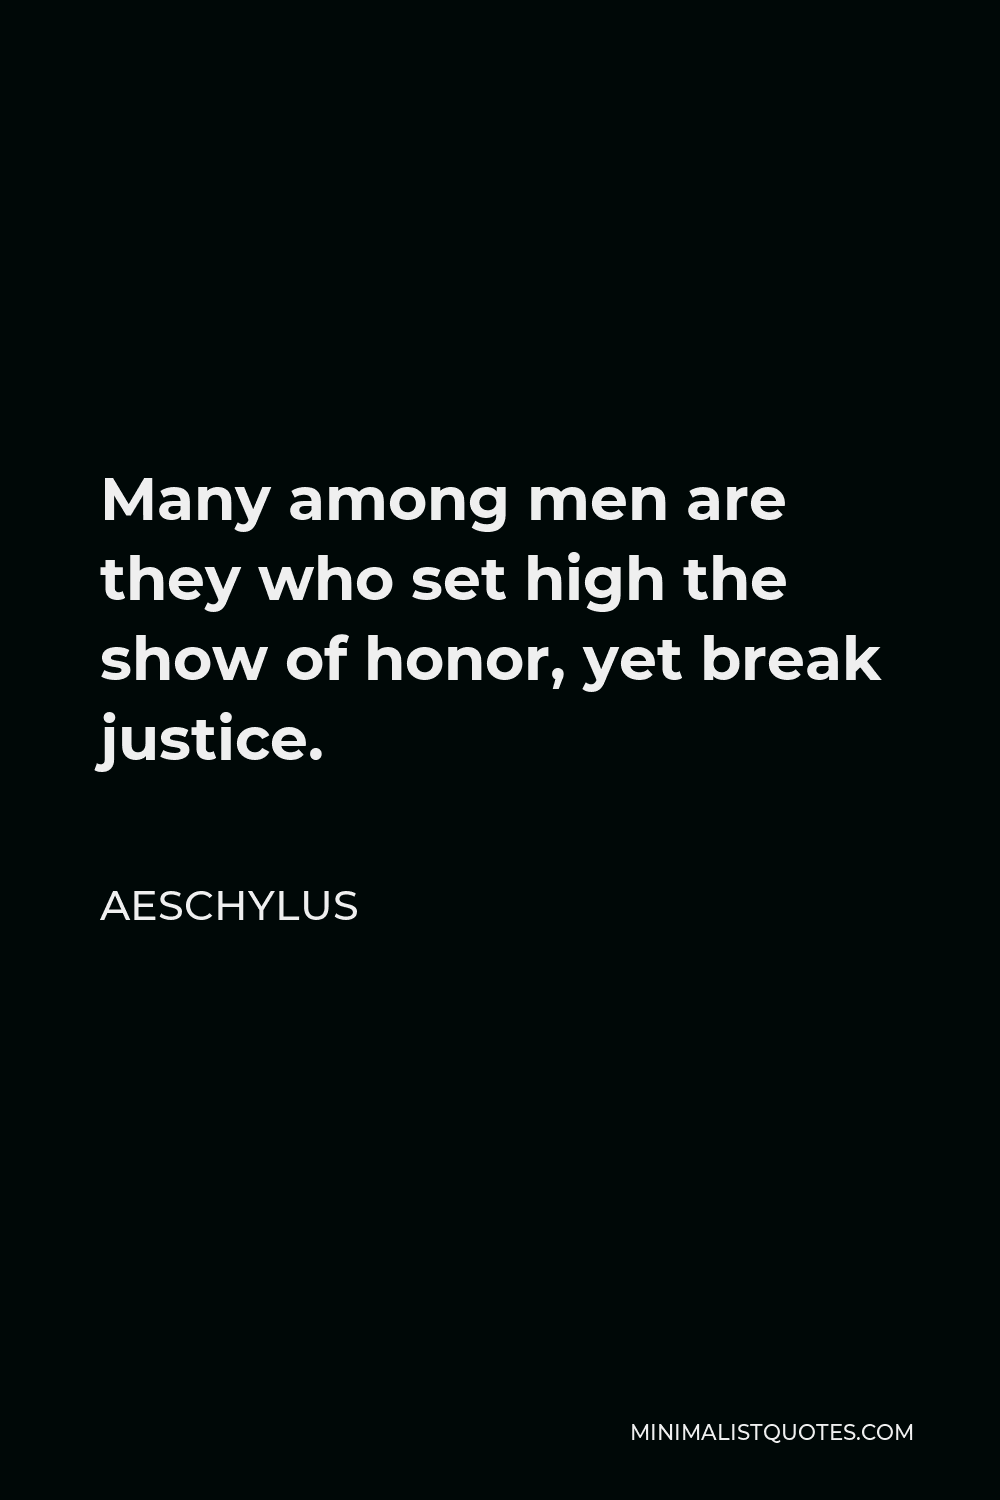 Aeschylus Quote - Many among men are they who set high the show of honor, yet break justice.